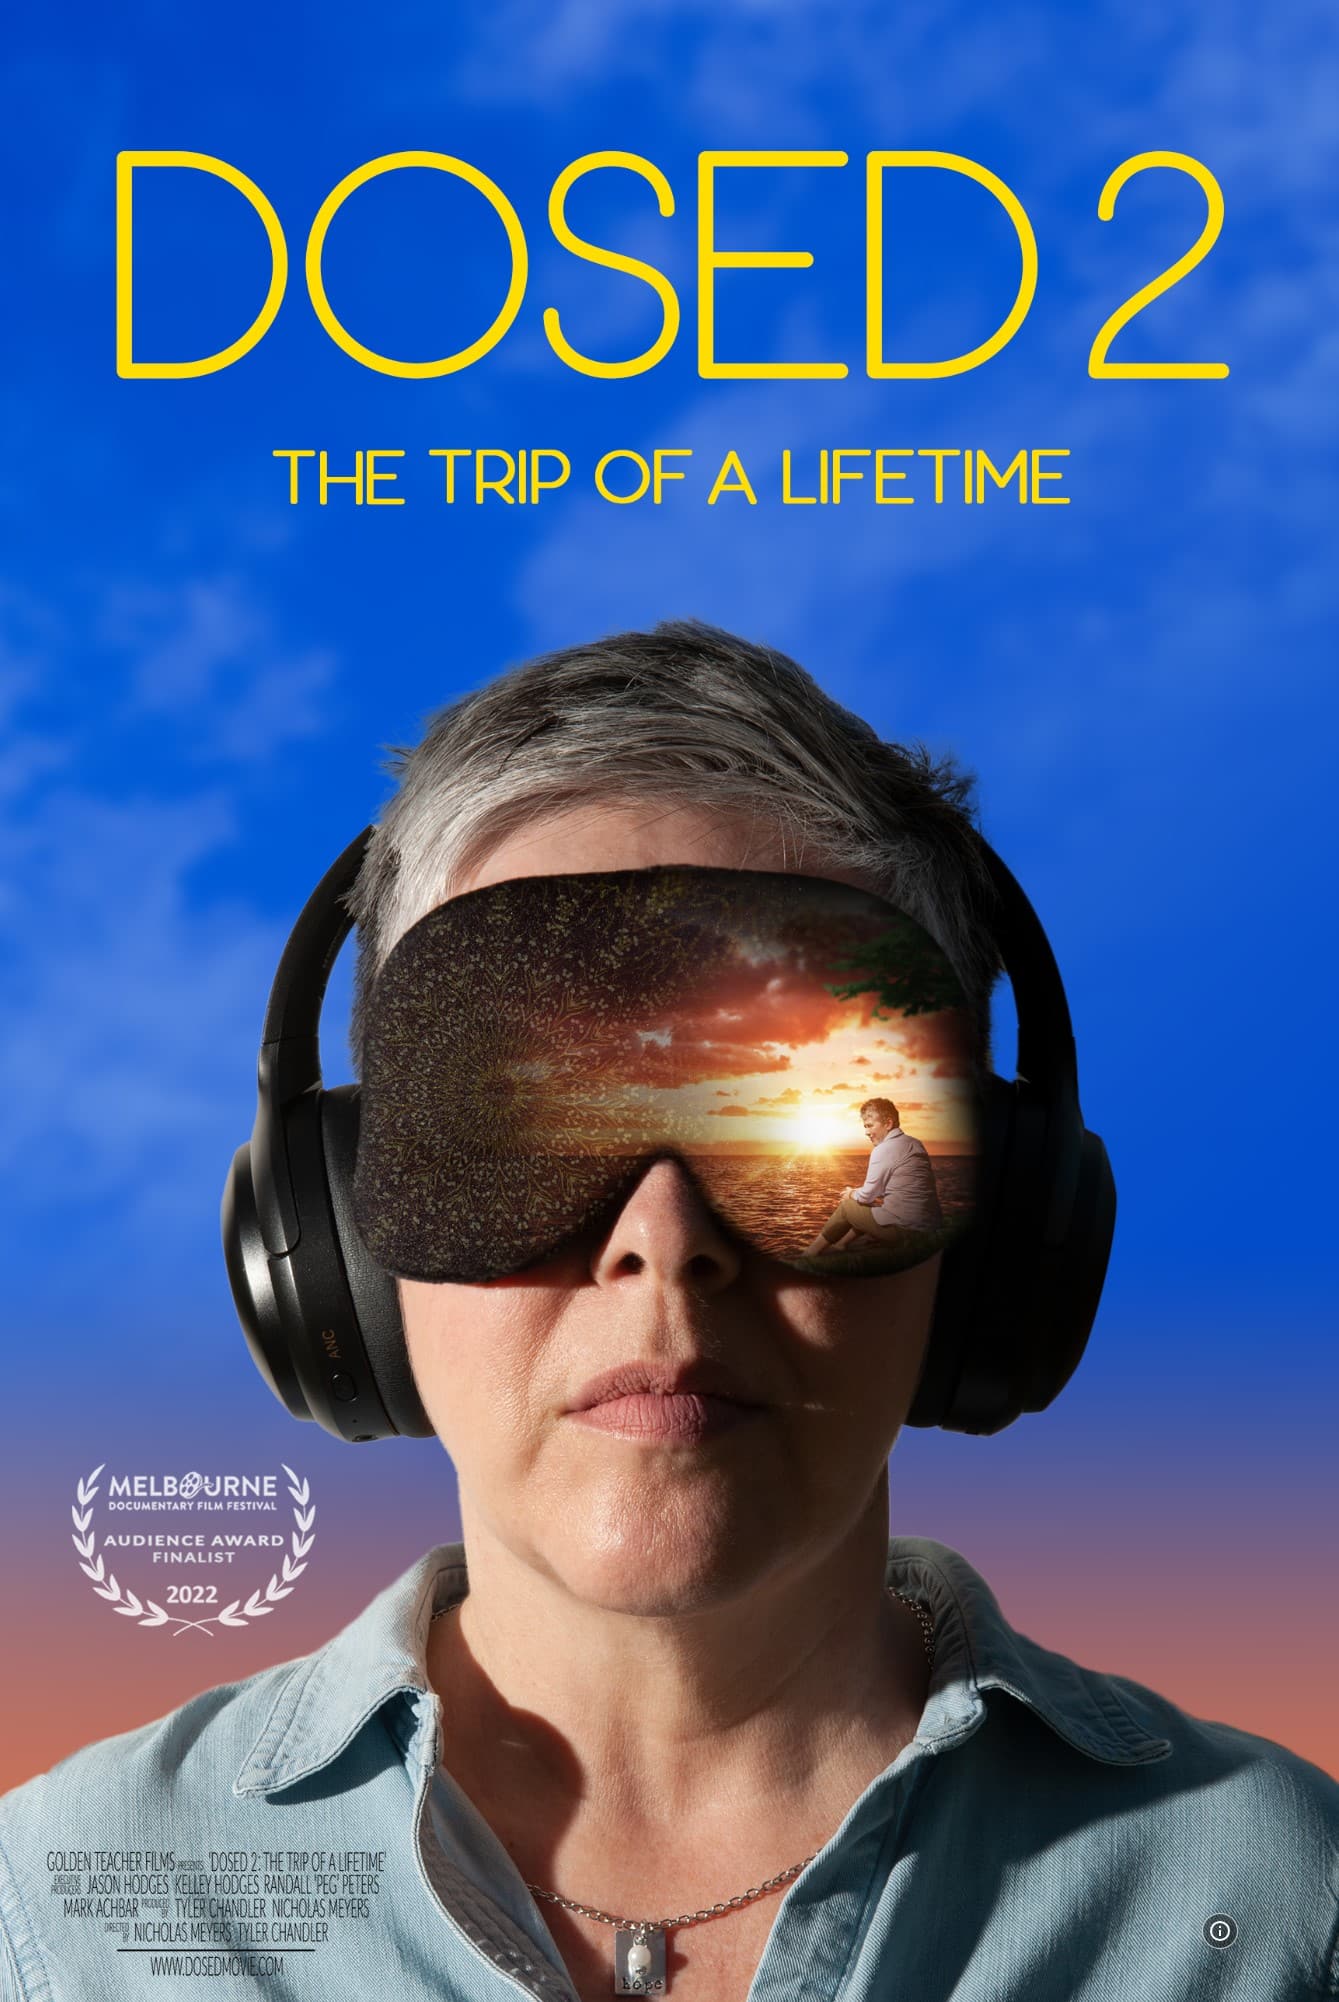 Movie poster for Dosed 2: The Trip of a Lifetime